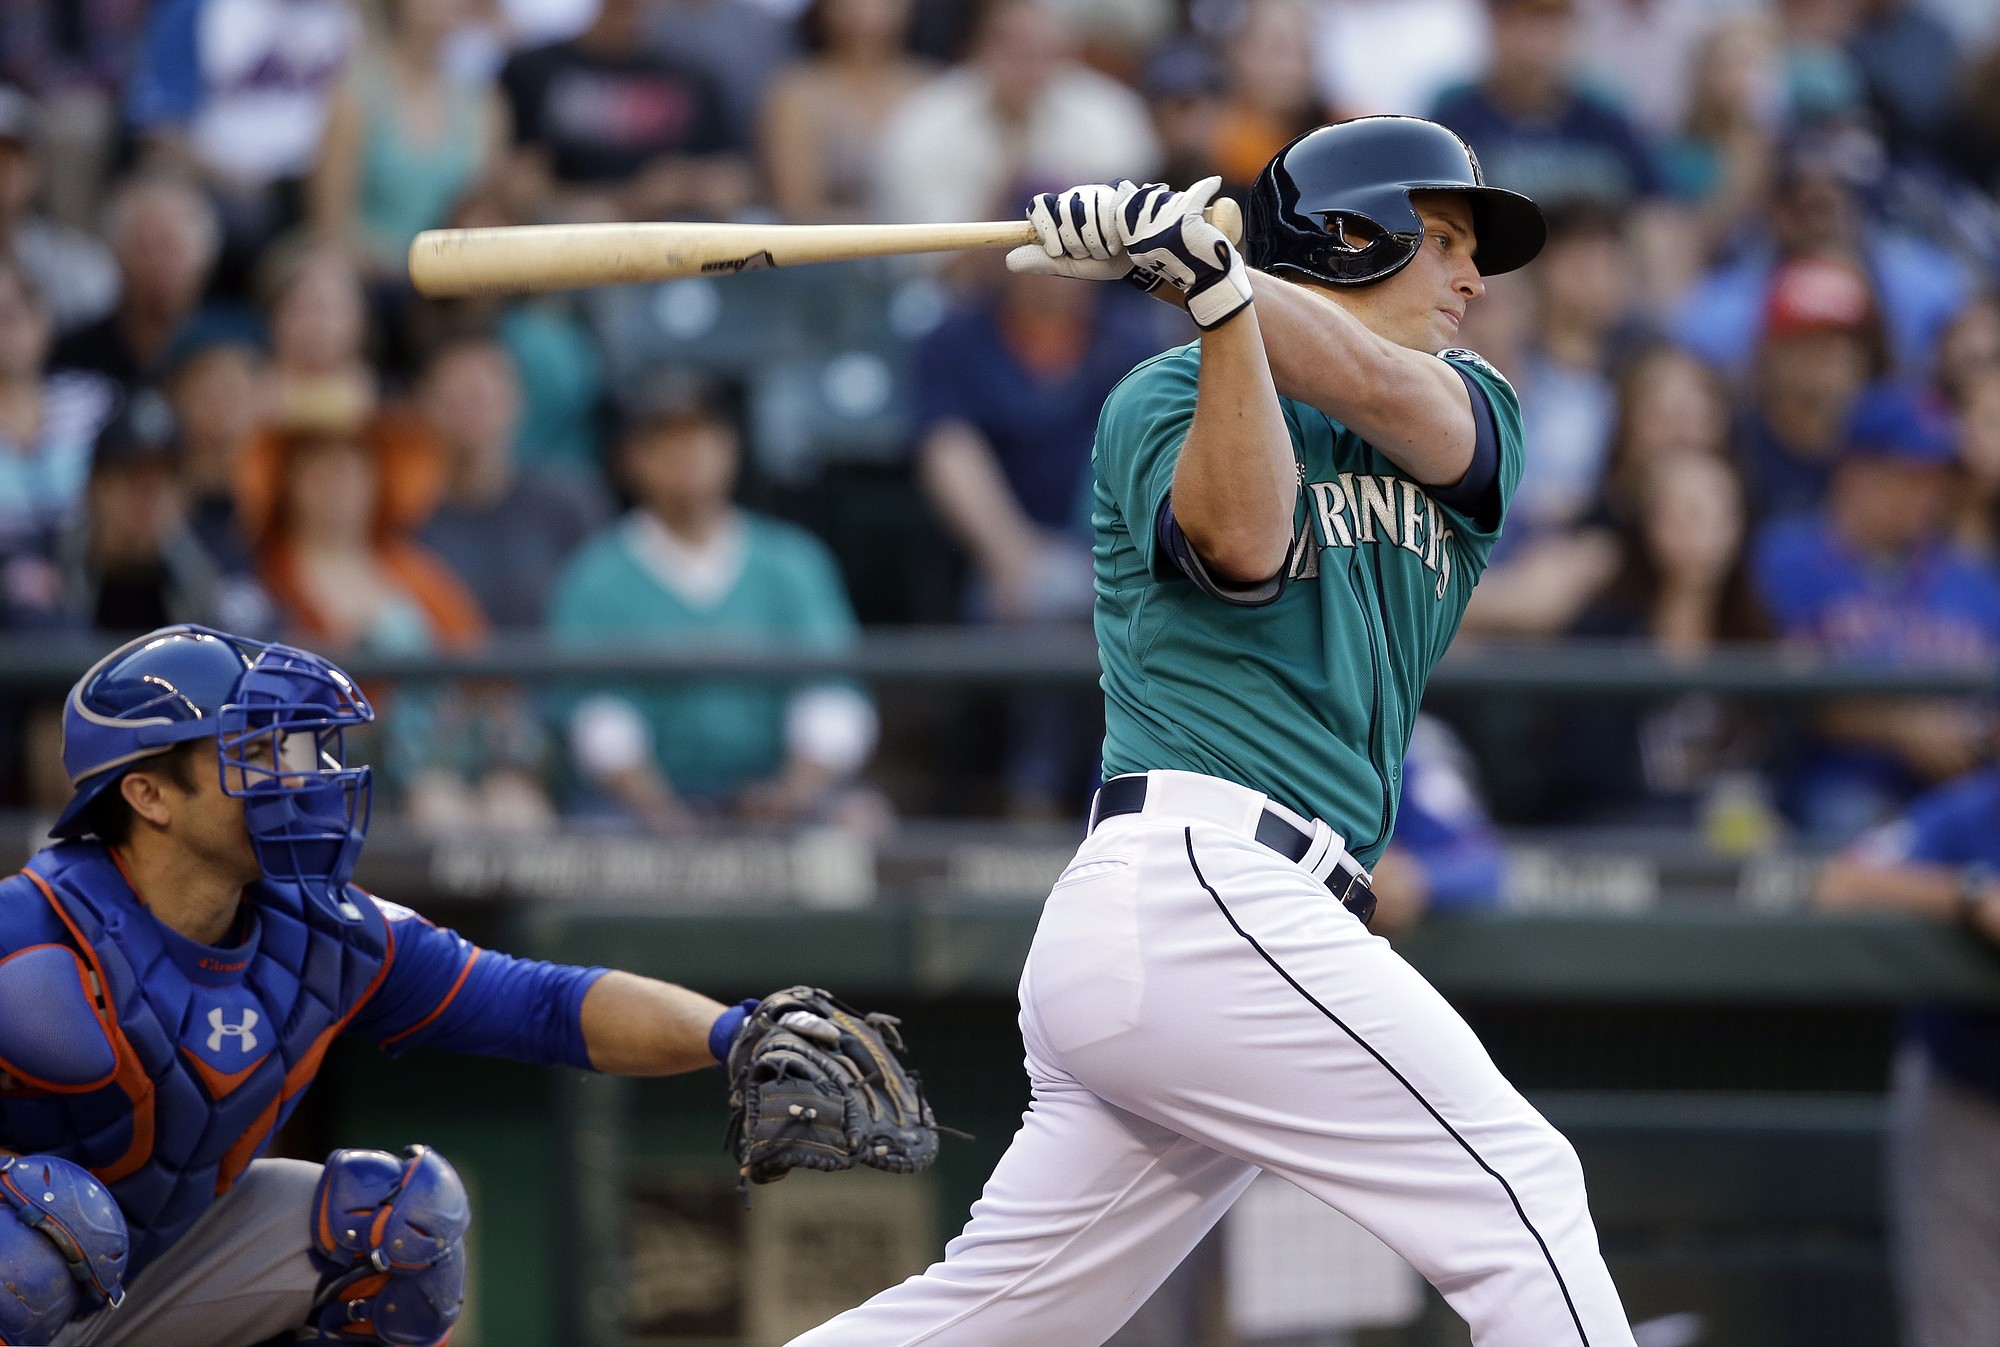 Seattle Mariners' Kyle Seager singles in a run in the first inning Monday against the New York Mets.